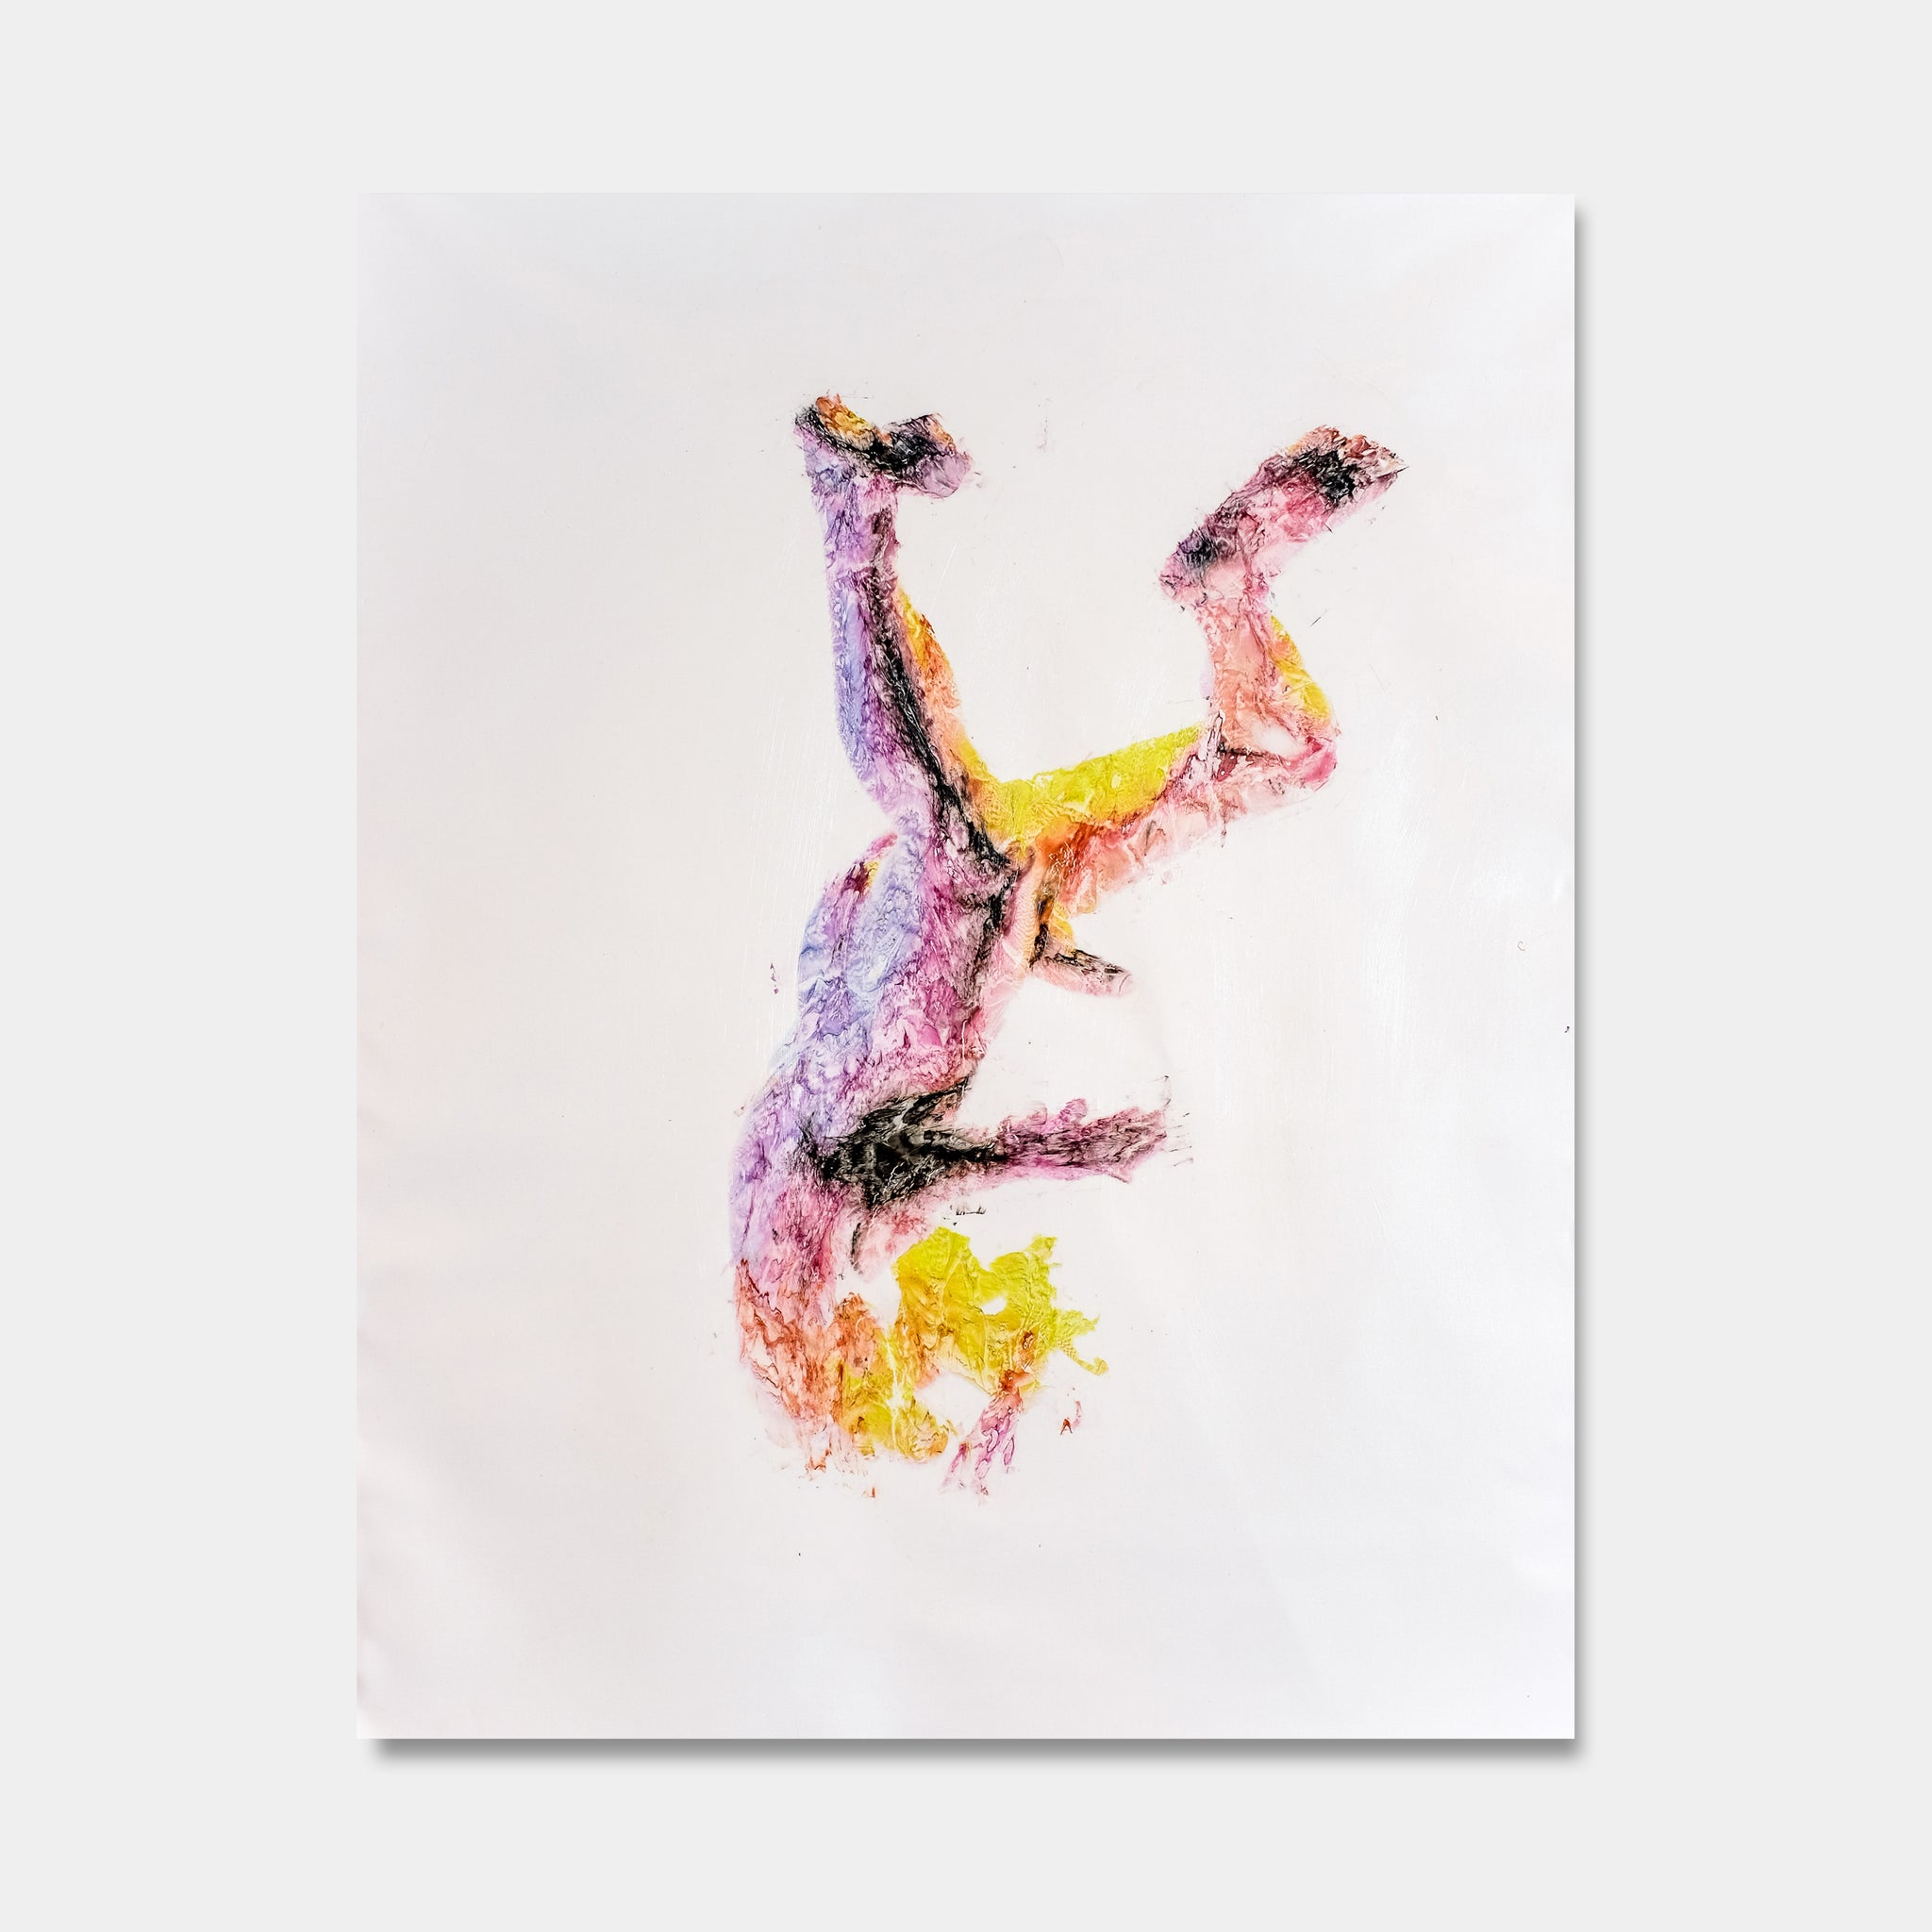 Artsuite - Temper is an original artwork by Tim Lytveninko showing himself static in the middle of a free fall .  Mixed media - pinks, yellow , purple pigment prints and acrylic paint on canvas.